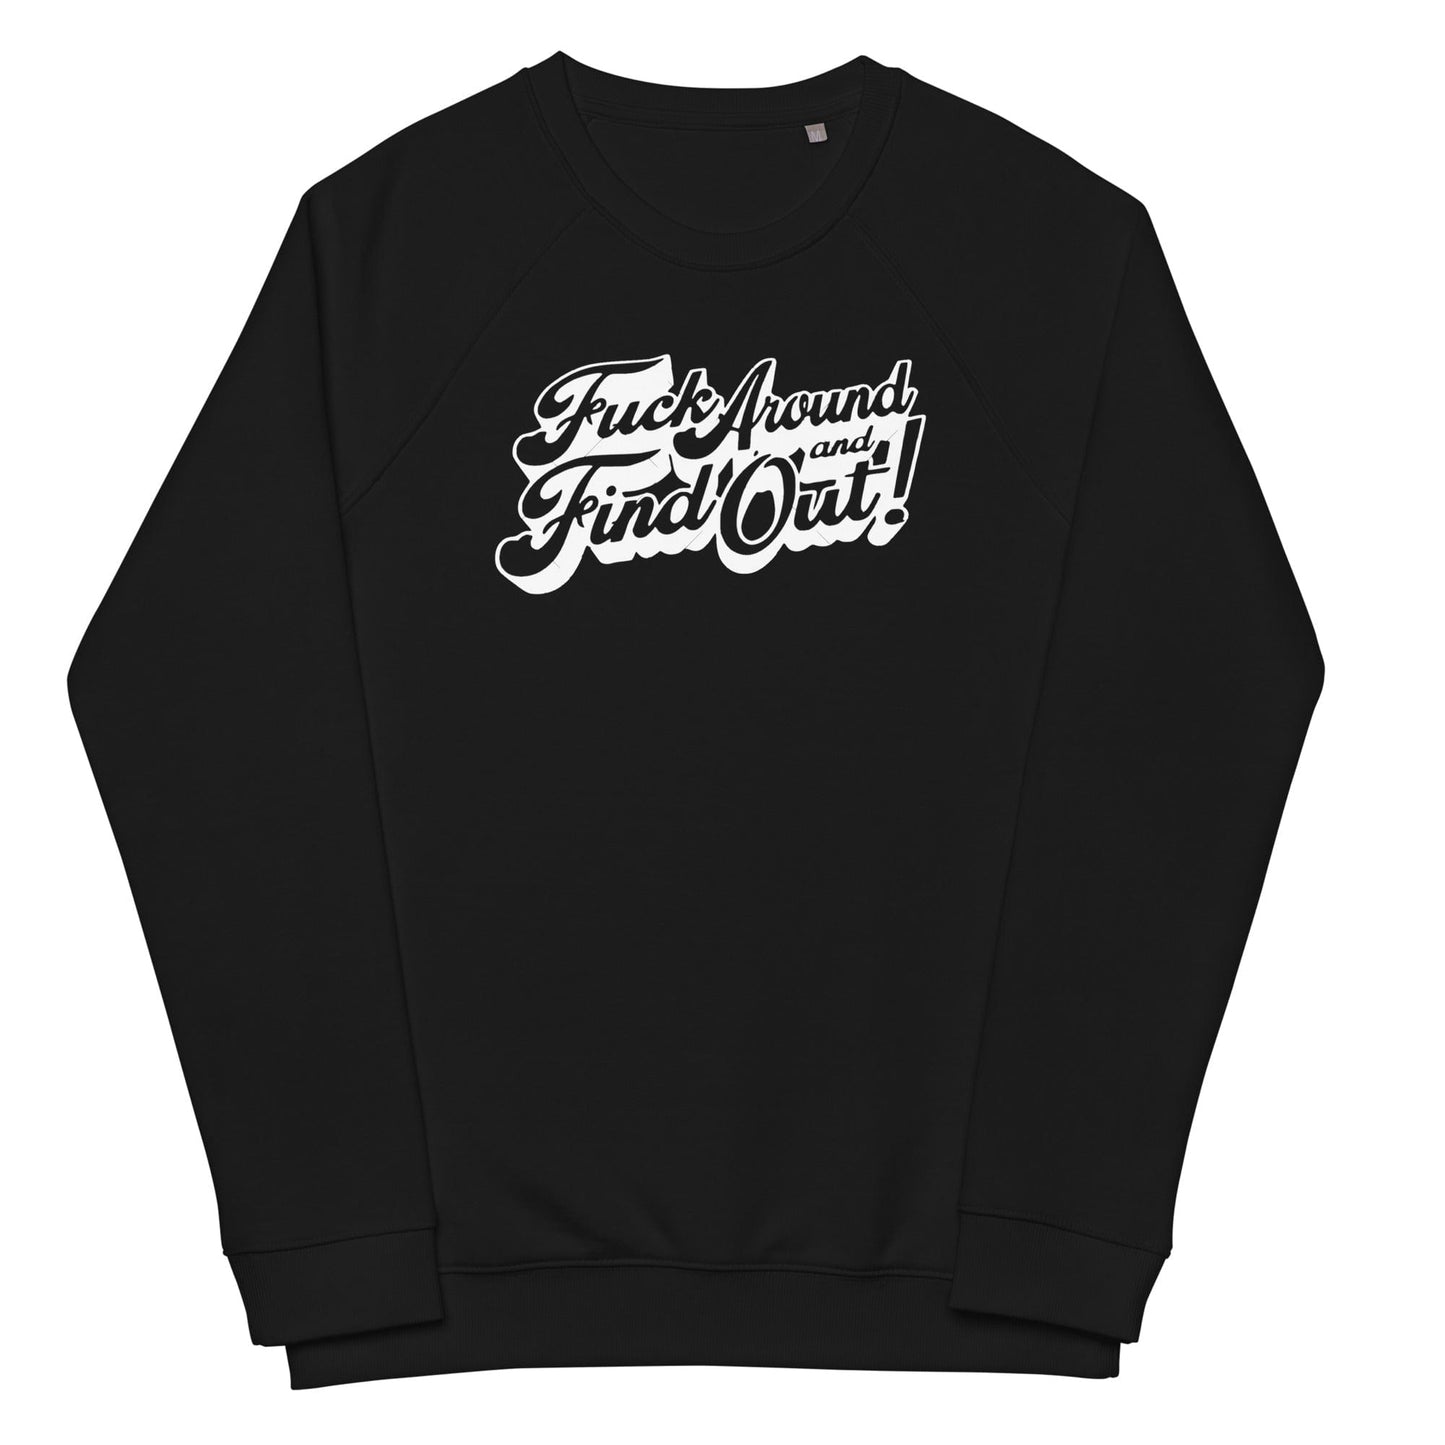 InsensitiviTees Shirts S / Black Fuck Around and Find Out Sweatshirt